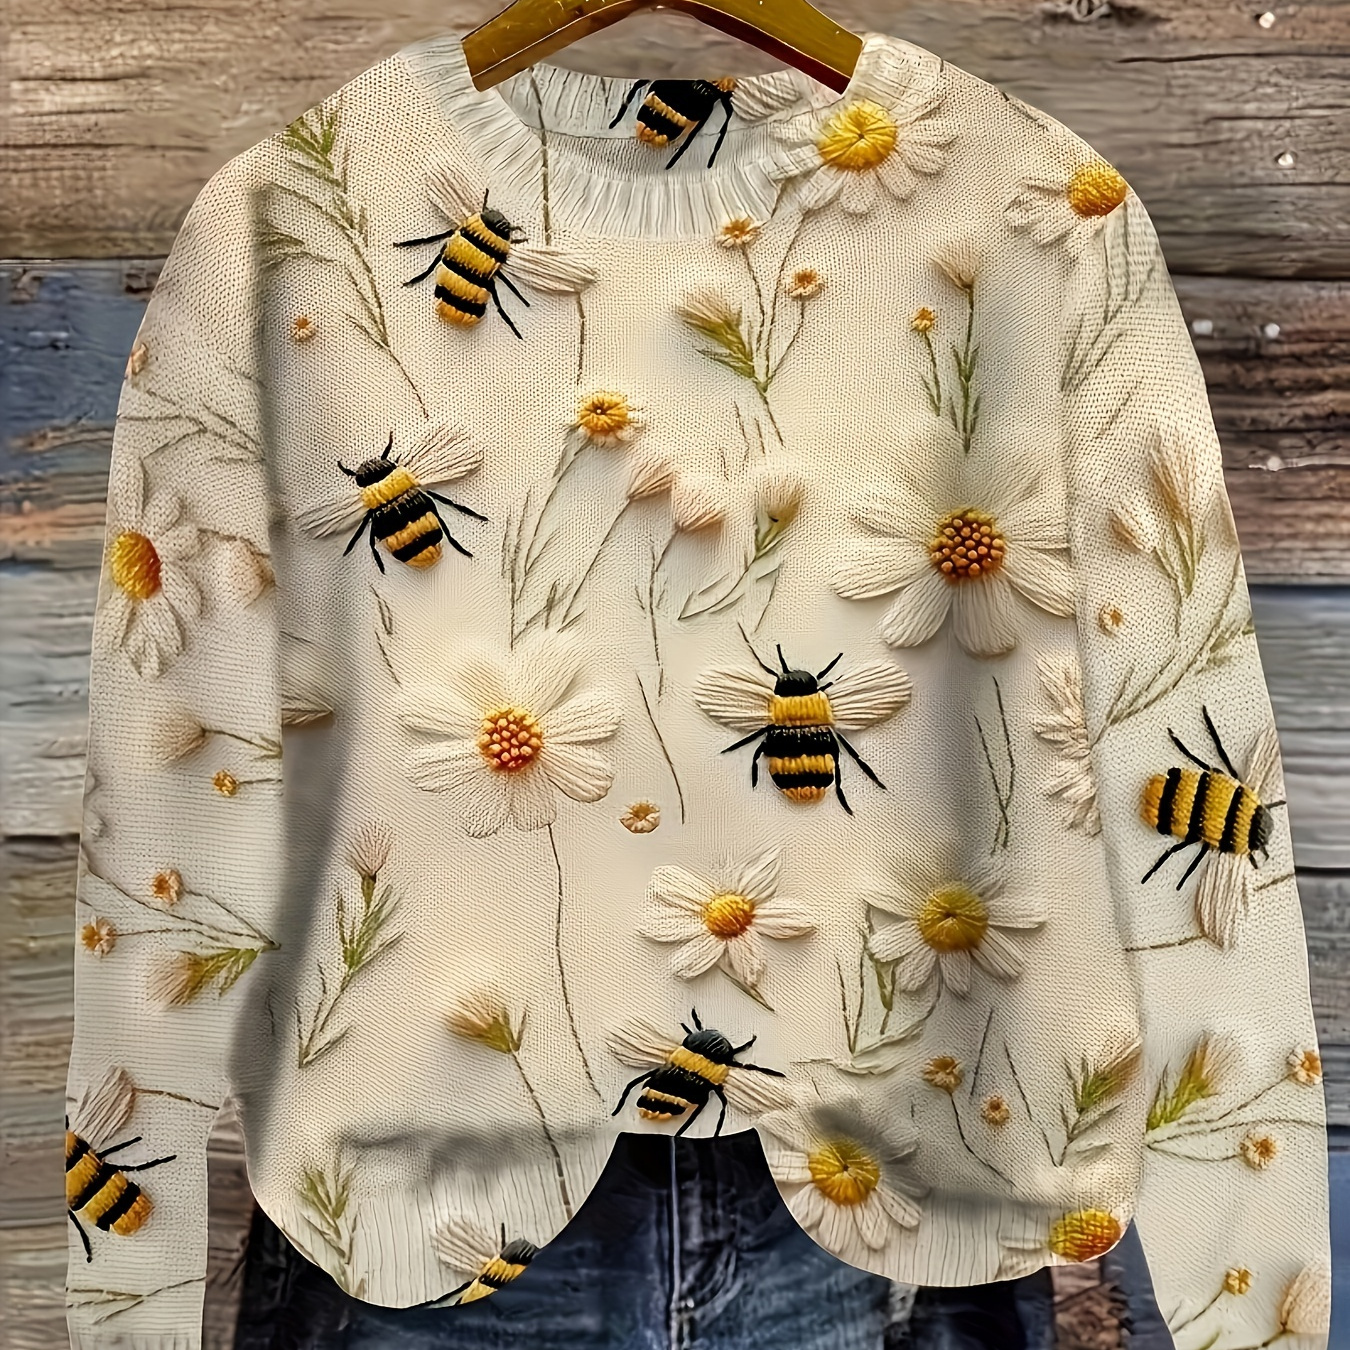 

Flower & Bee Pattern Crew Neck Sweater, Casual Long Sleeve Thin Sweater For Spring & Fall, Women's Clothing